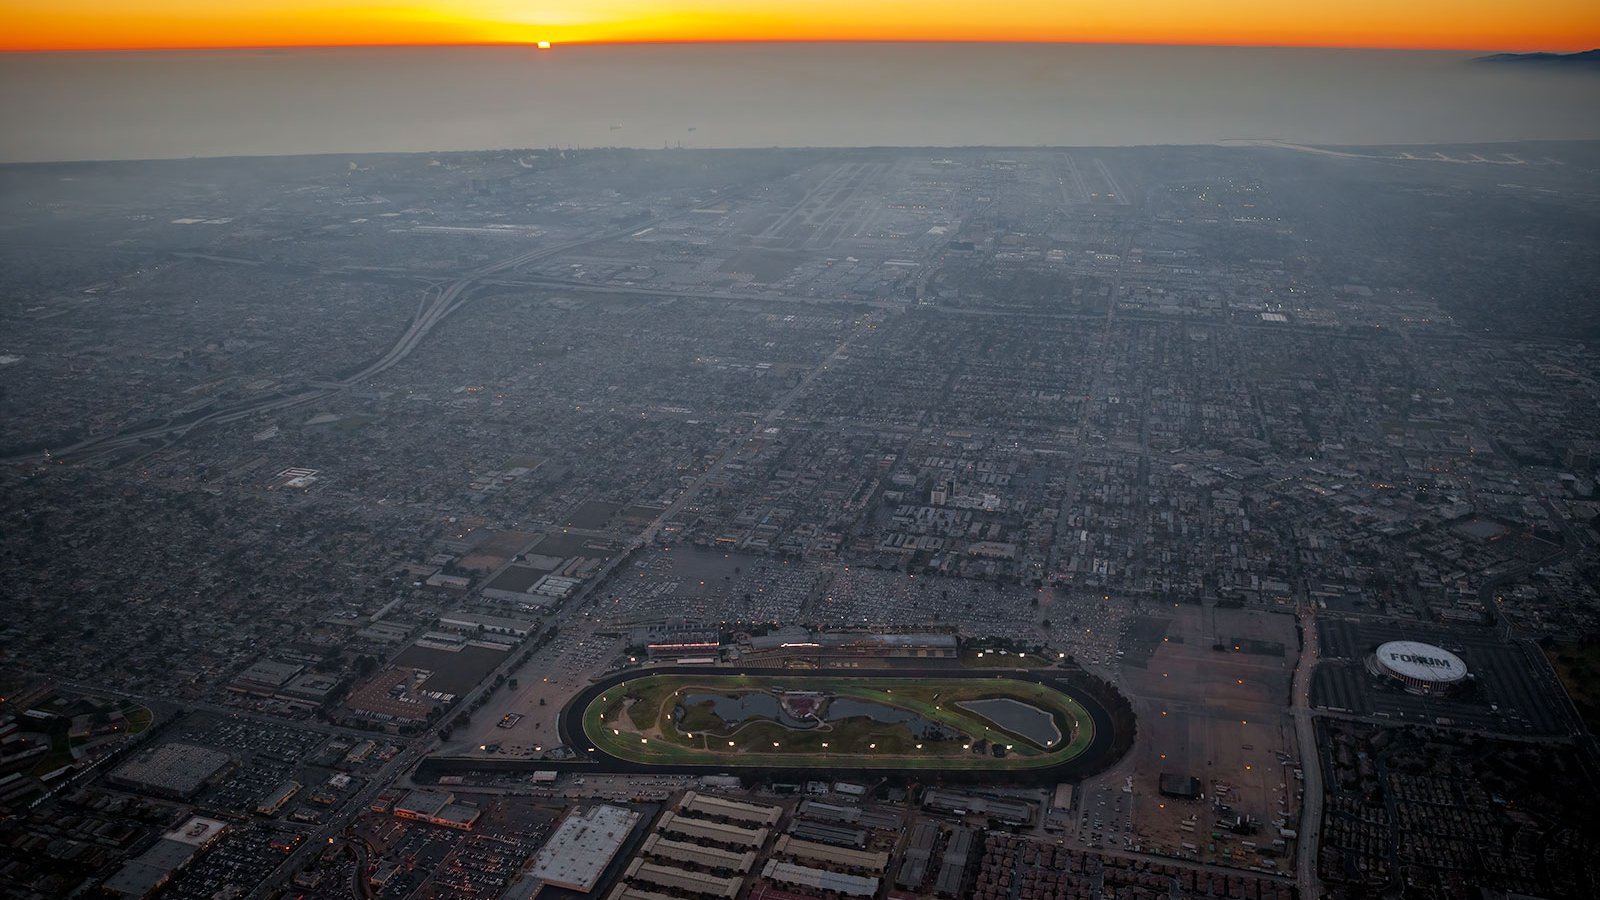 Blog sunset photo of Hollywood Park in Inglewood, California before the construction of the SoFi Stadium